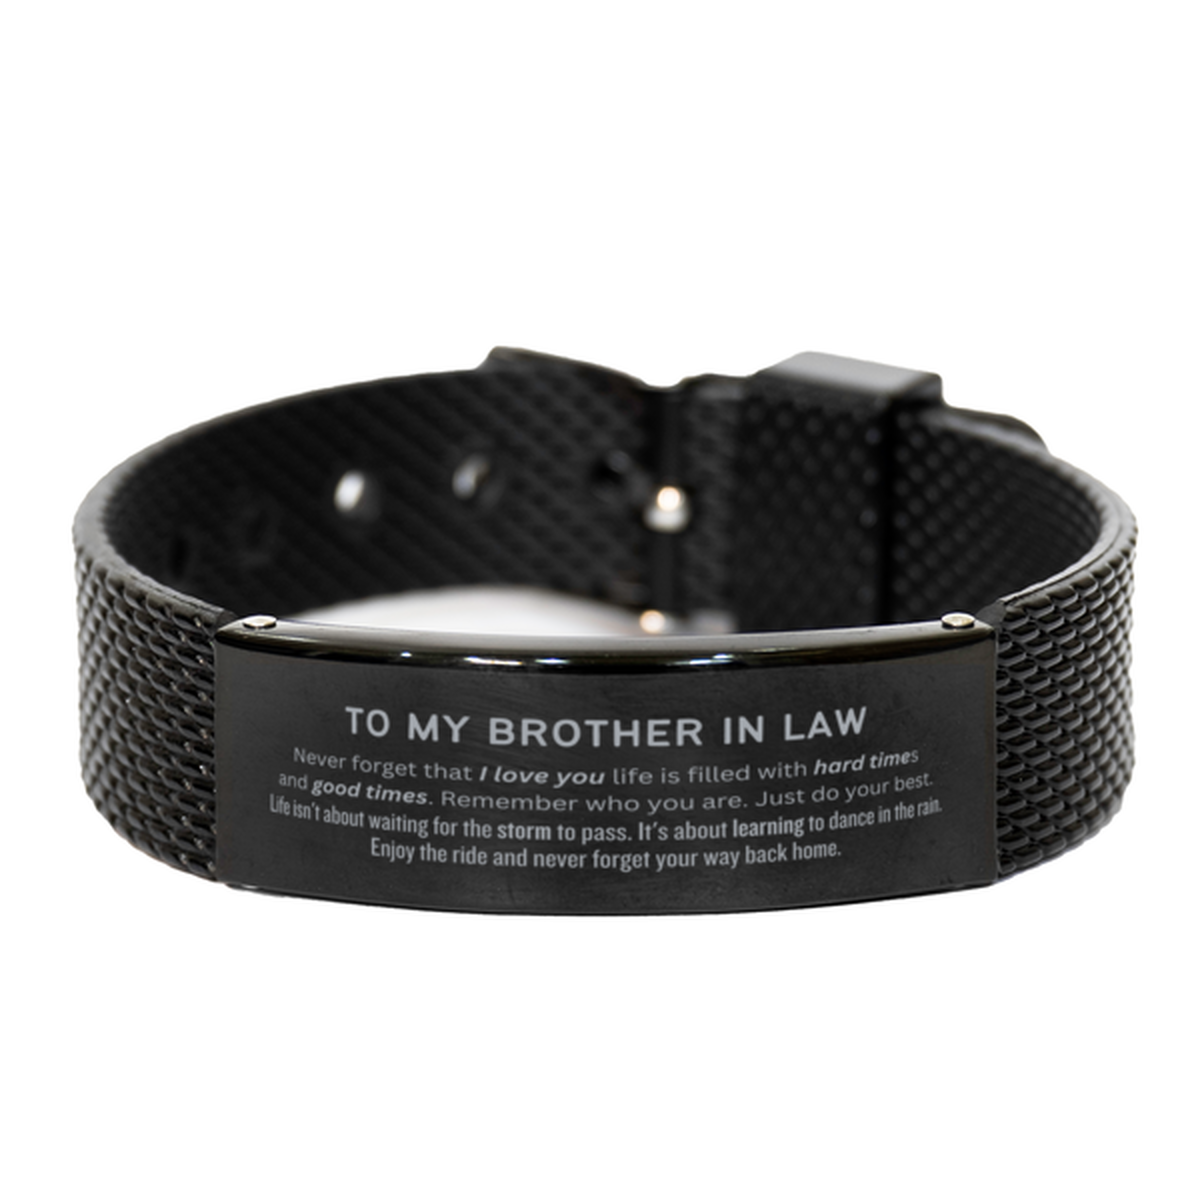 Christmas Brother In Law Black Shark Mesh Bracelet Gifts, To My Brother In Law Birthday Thank You Gifts For Brother In Law, Graduation Unique Gifts For Brother In Law To My Brother In Law Never forget that I love you life is filled with hard times and goo